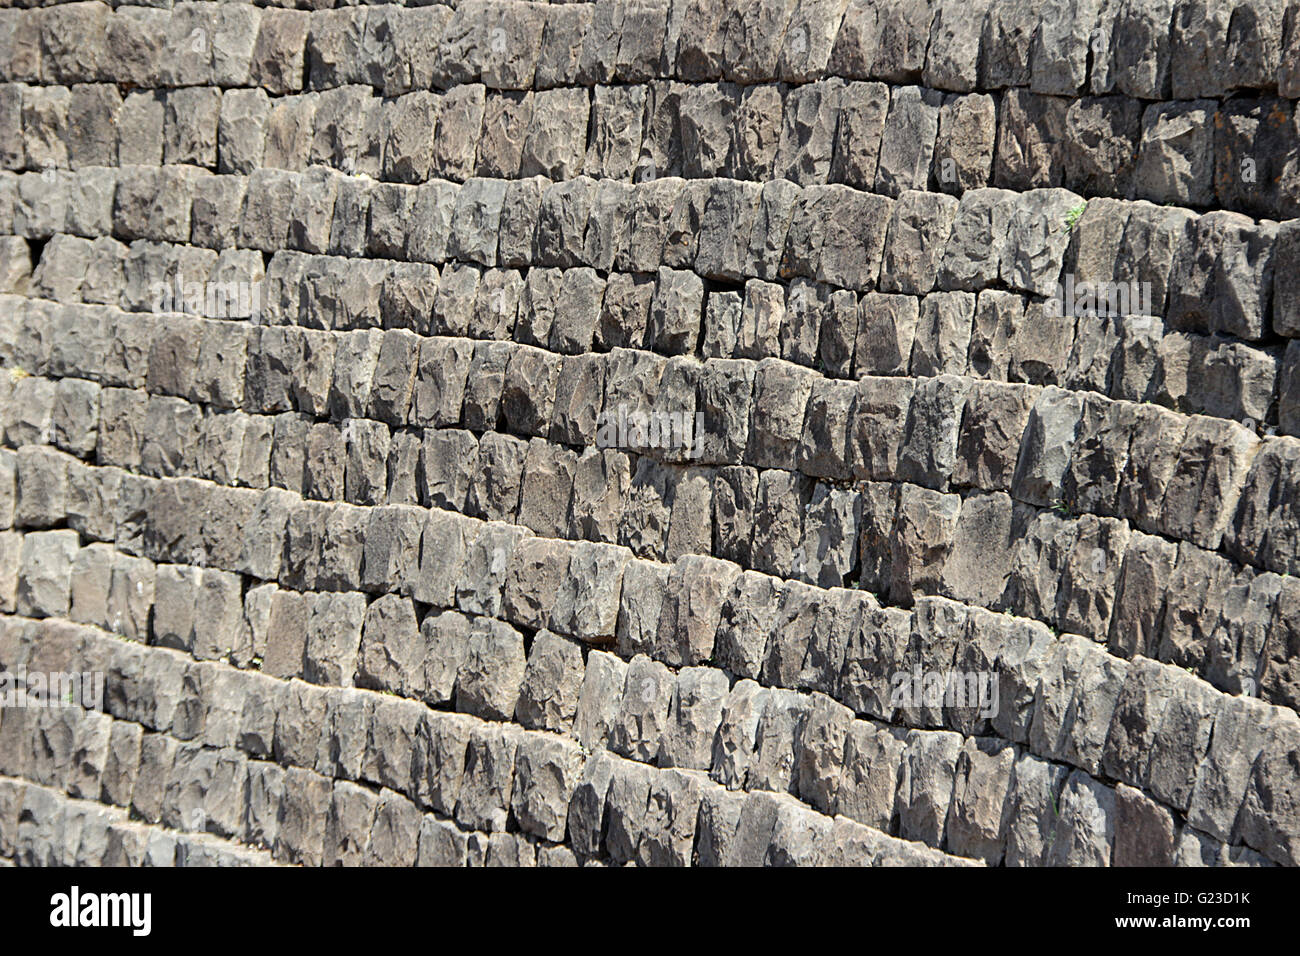 Vertical wall built of dressed stone blocks stalked in horizontal rows Stock Photo